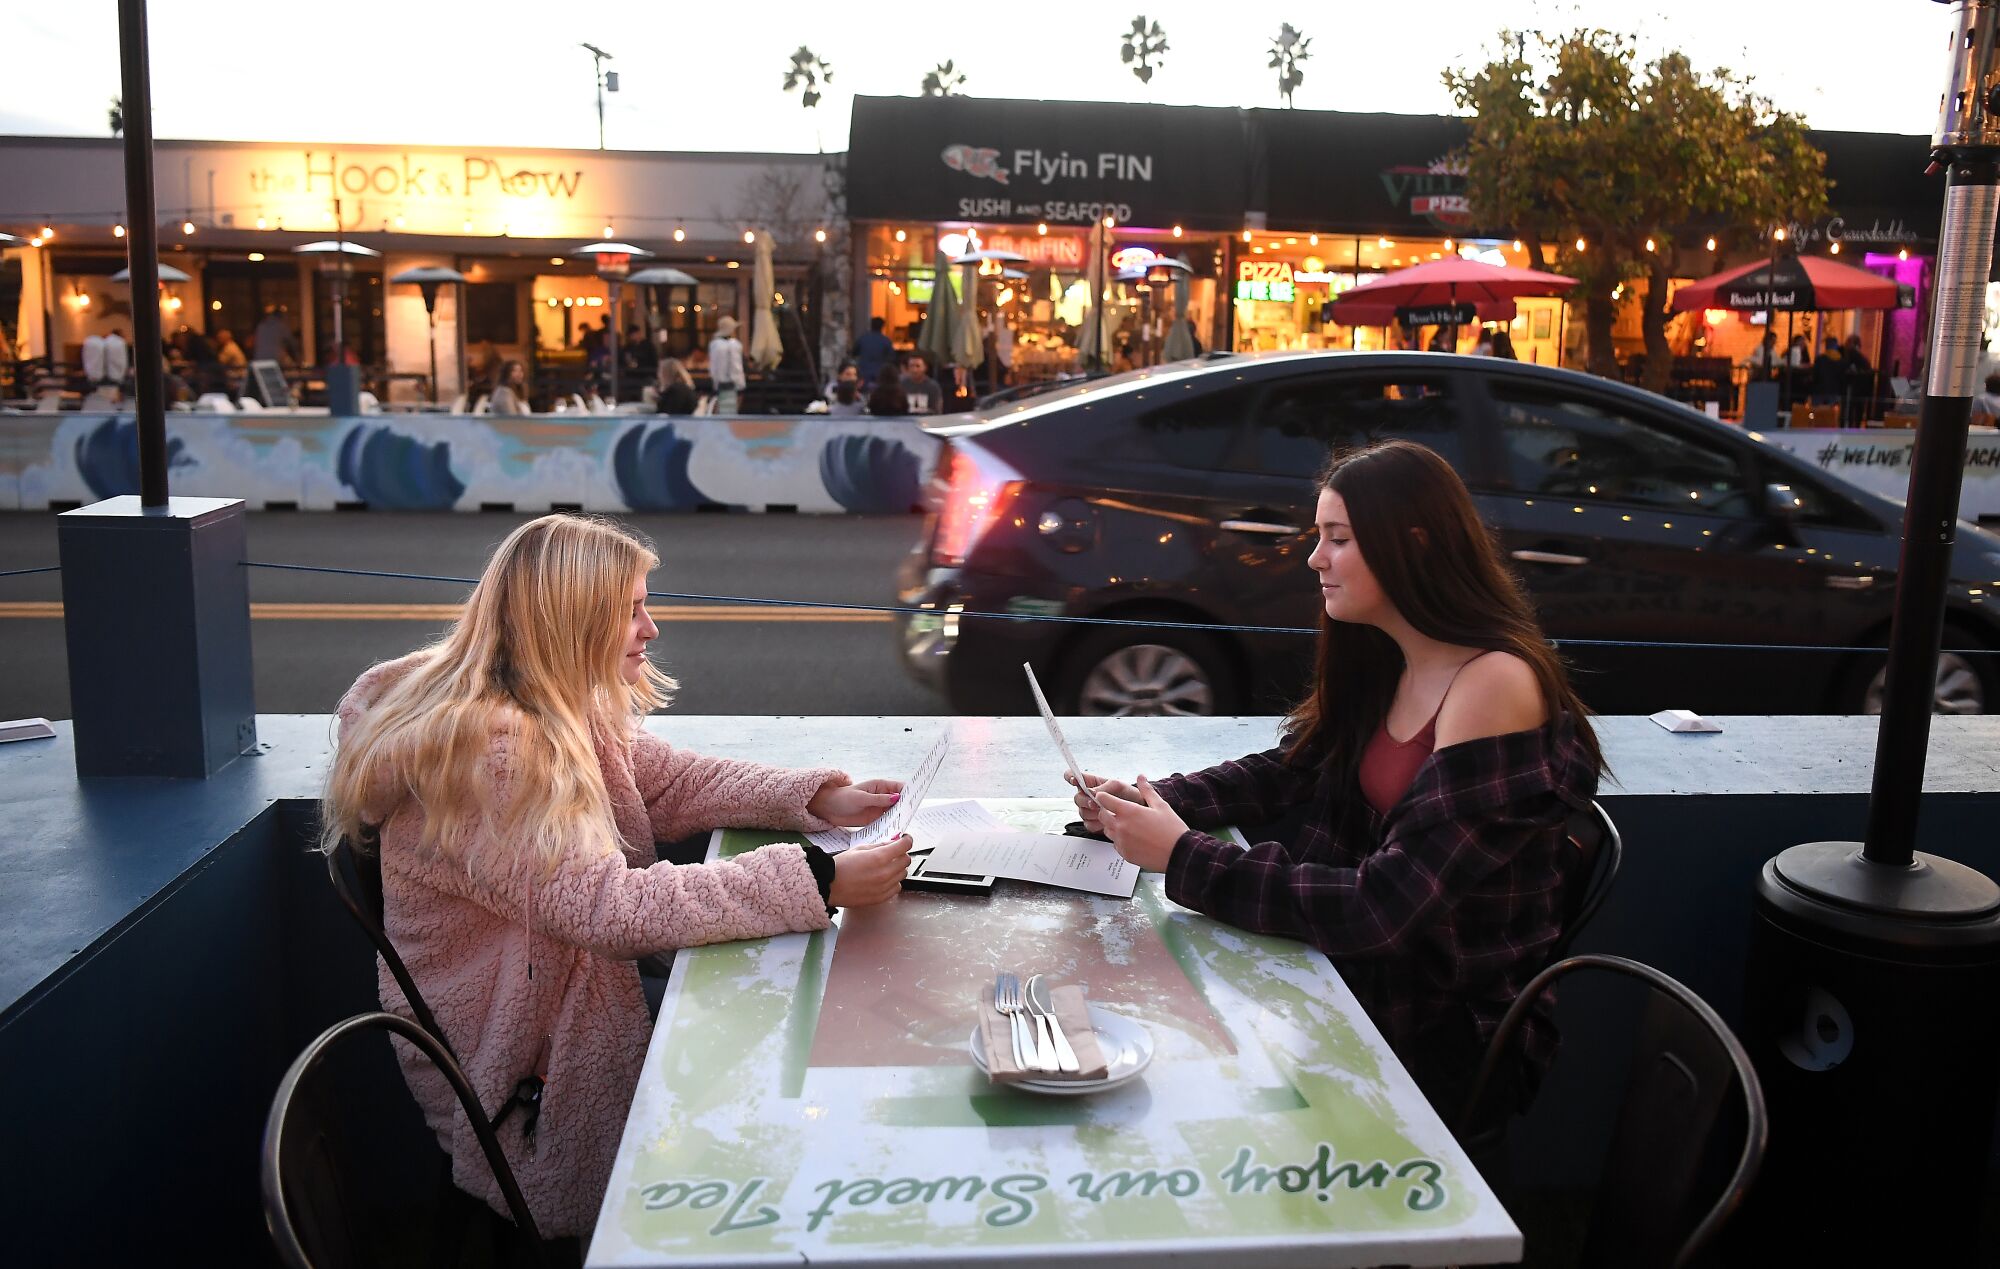 Two women, unmasked, speak across an outdoor table at a restaurant.